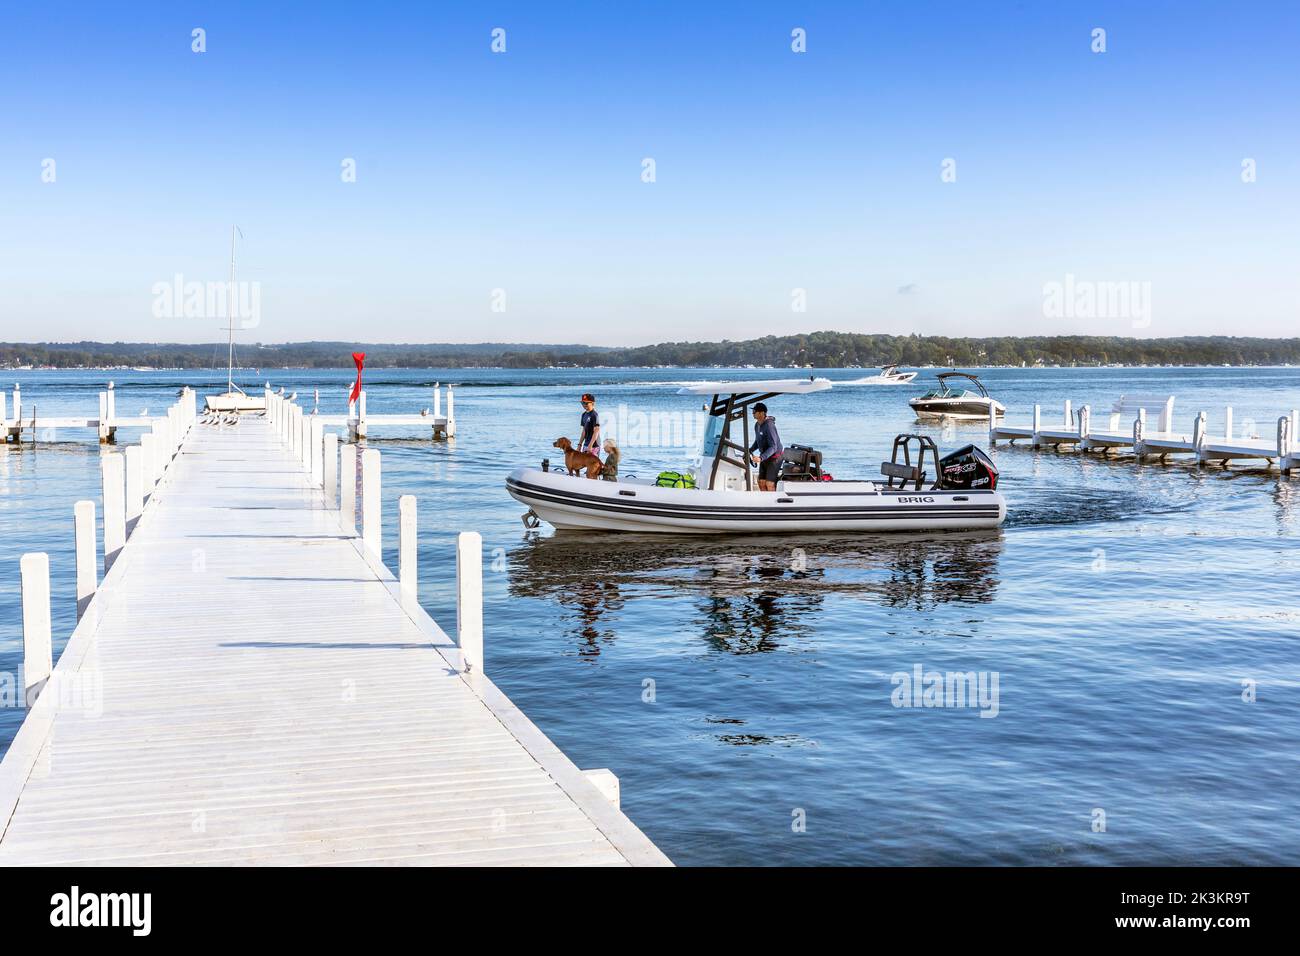 Small rubber dinghy arriving at a white wooden pier, near Fontana, Lake Geneva, Wisconsin, America. Stock Photo